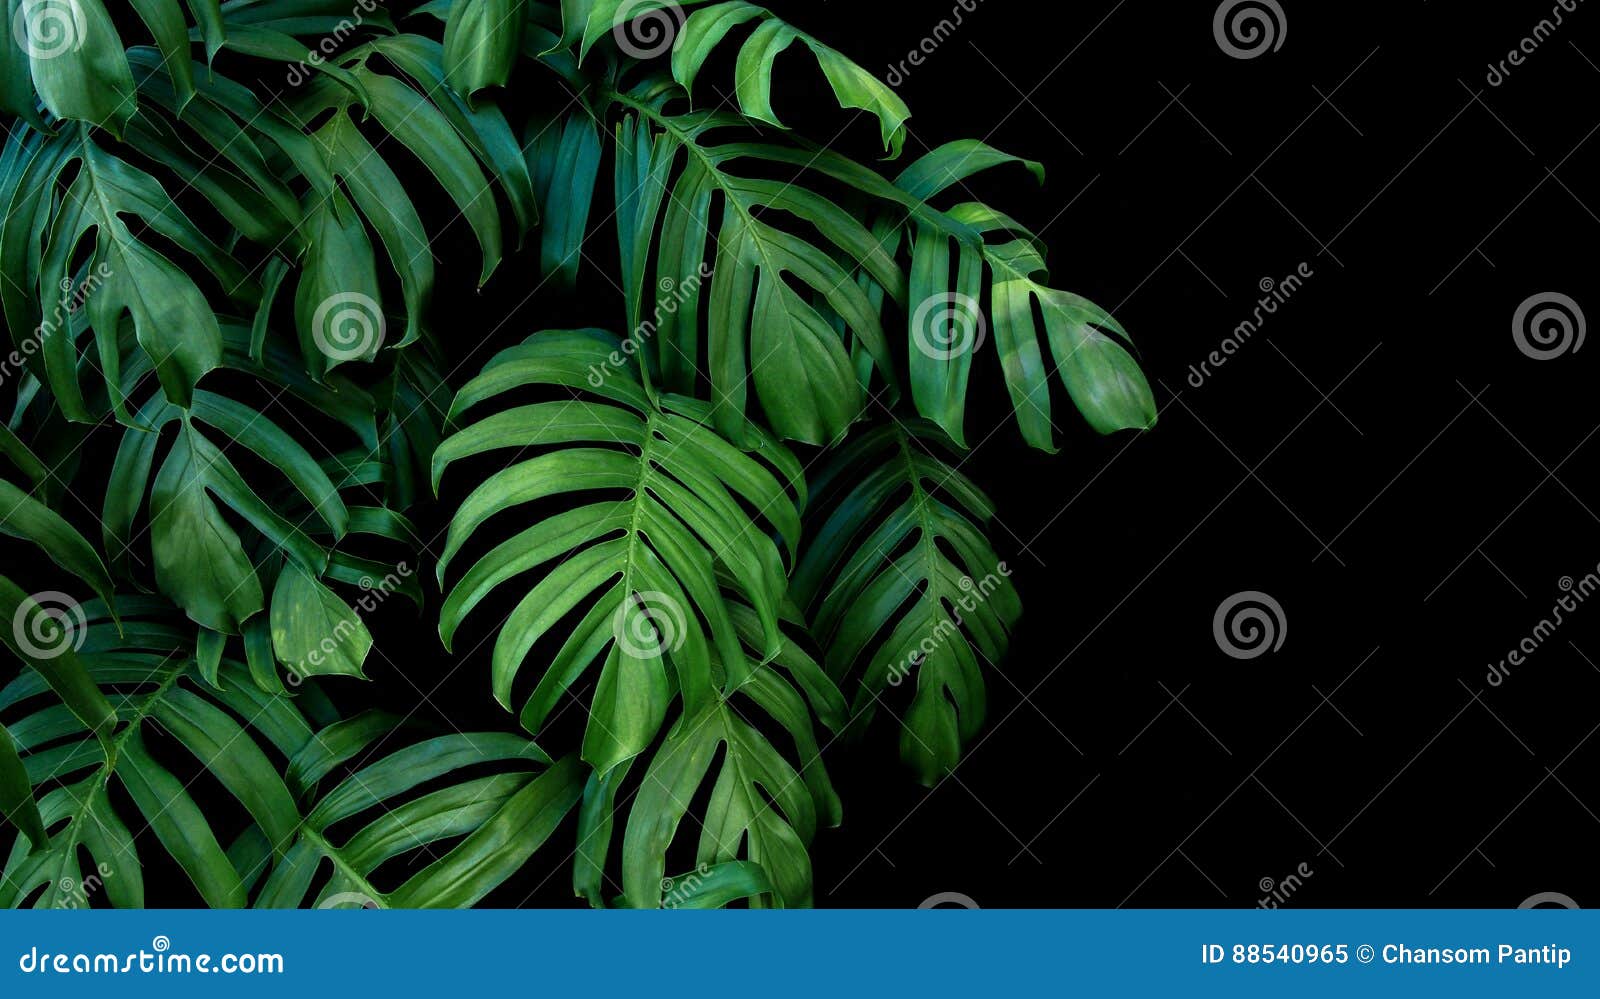 green leaves of monstera plant growing in wild, the tropical for